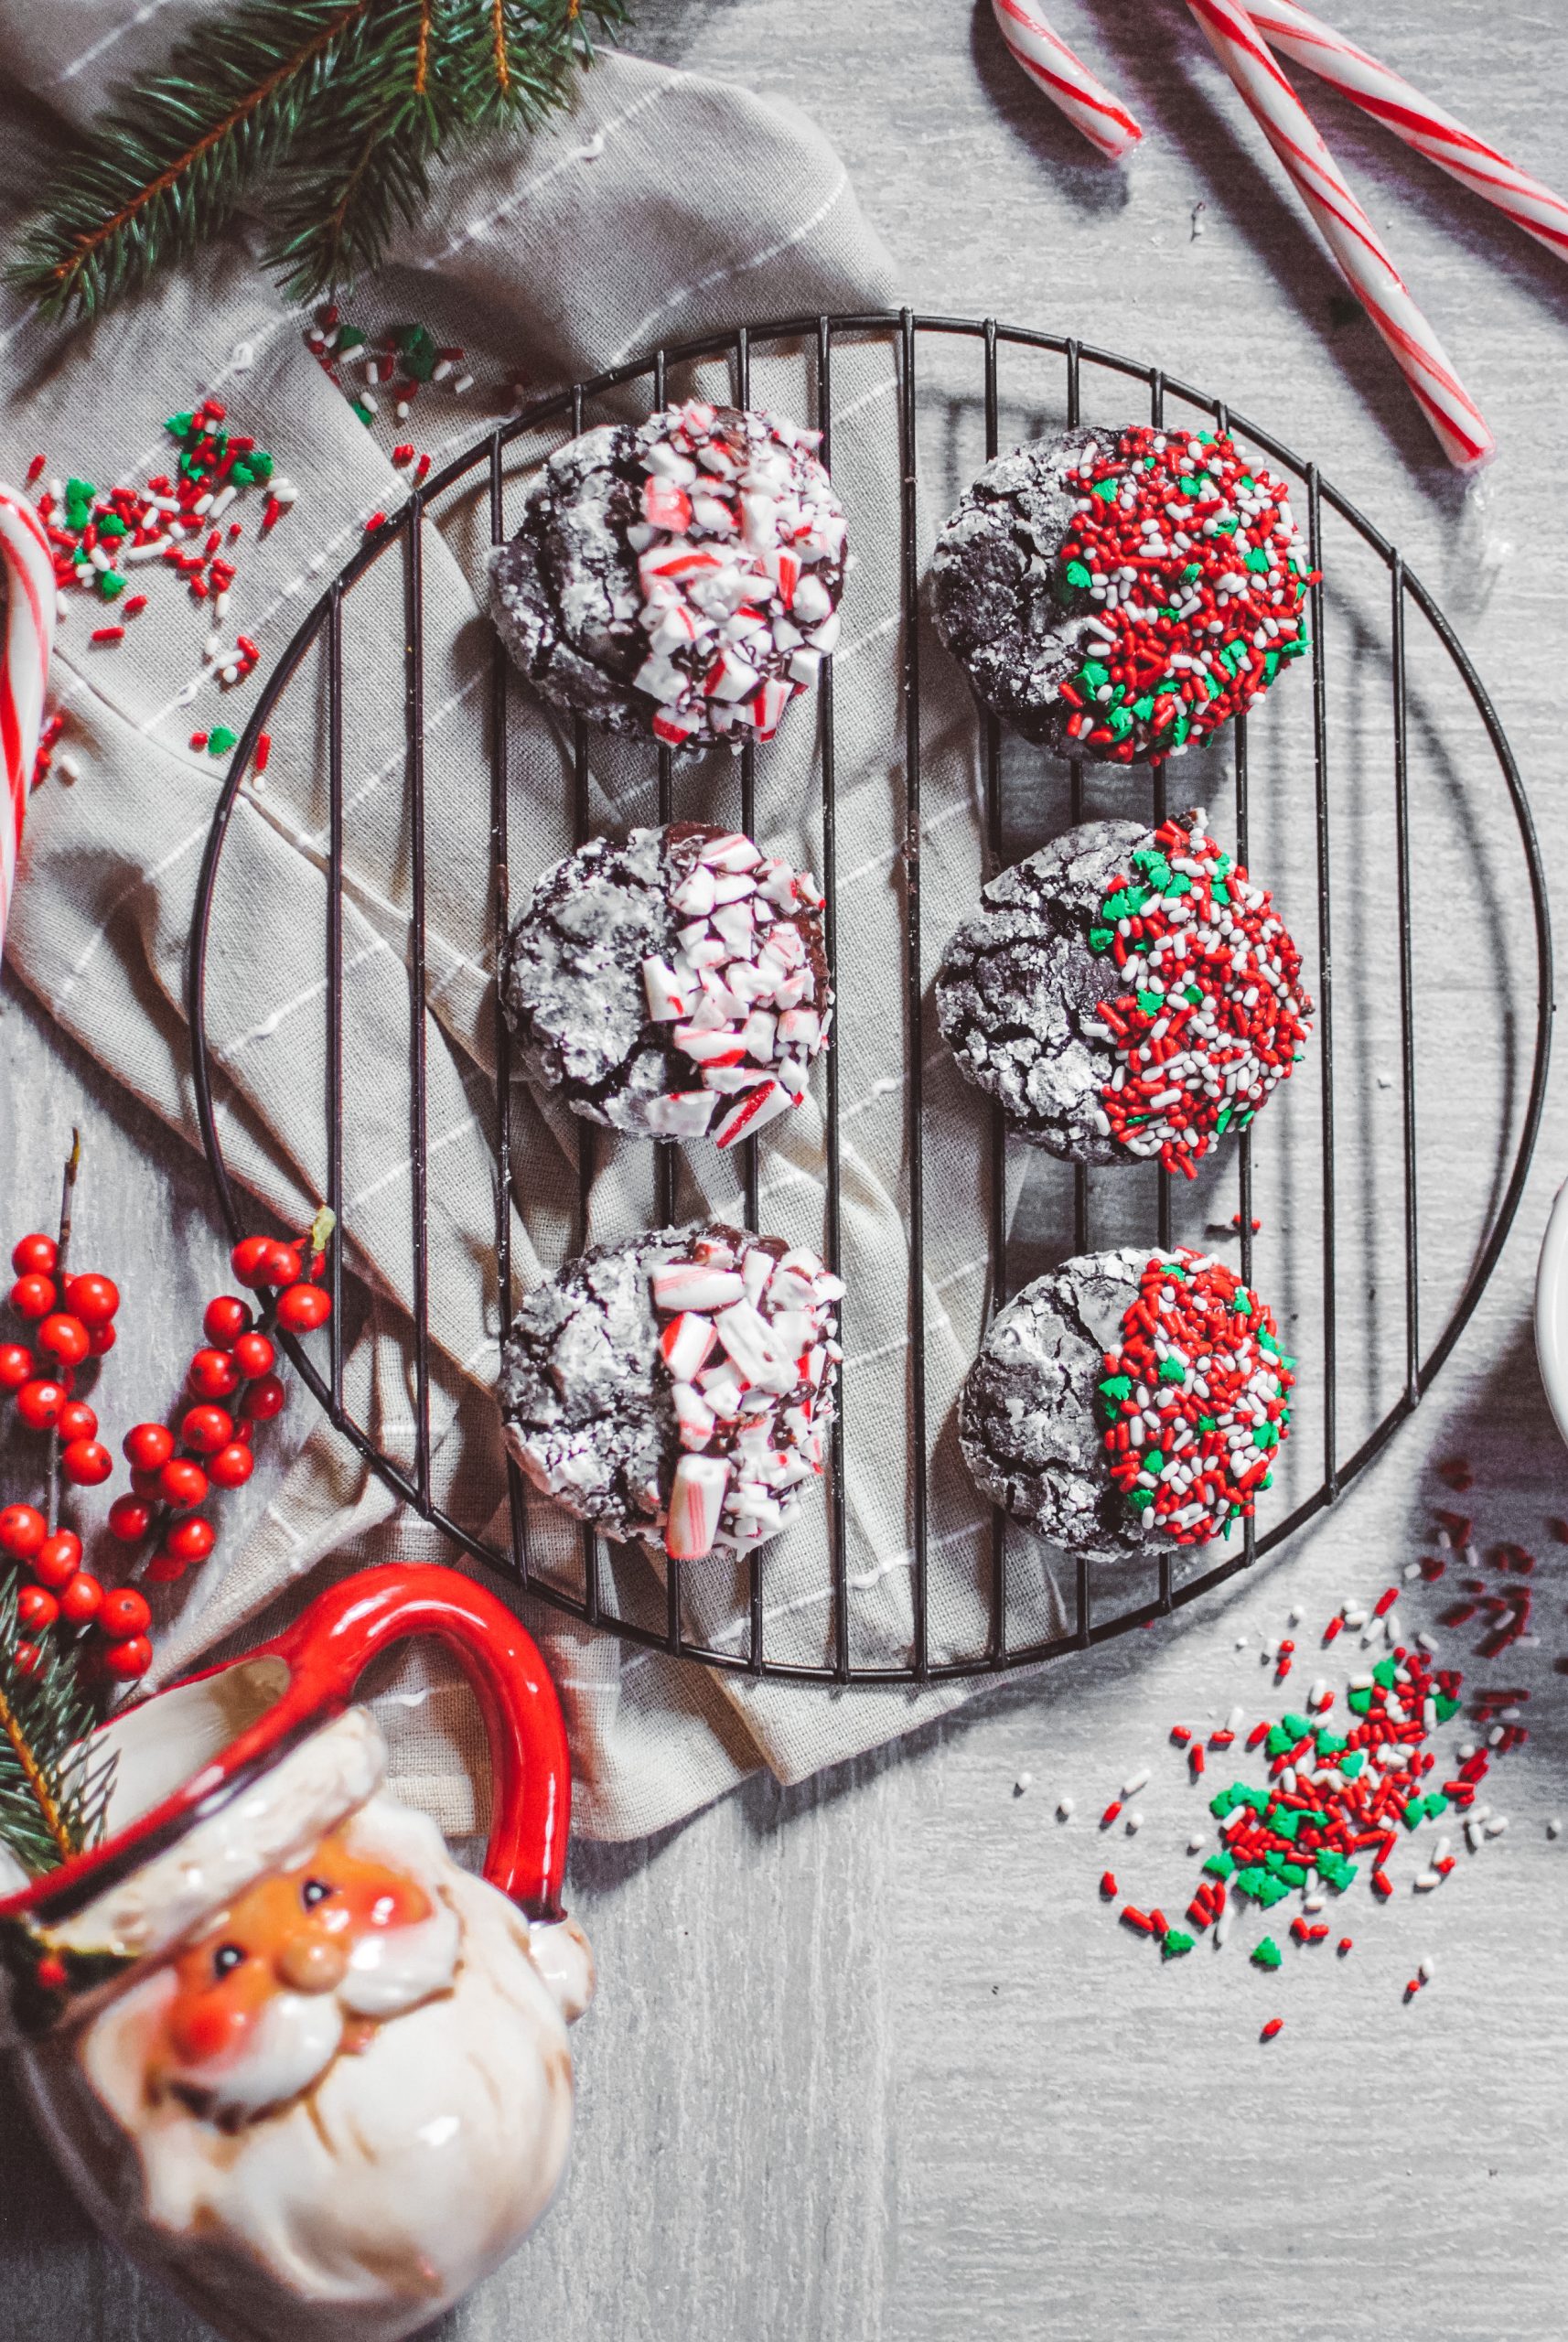 peppermint chocolate crinkle cookies with candy canes, green pine, sprinkles and a santa mug